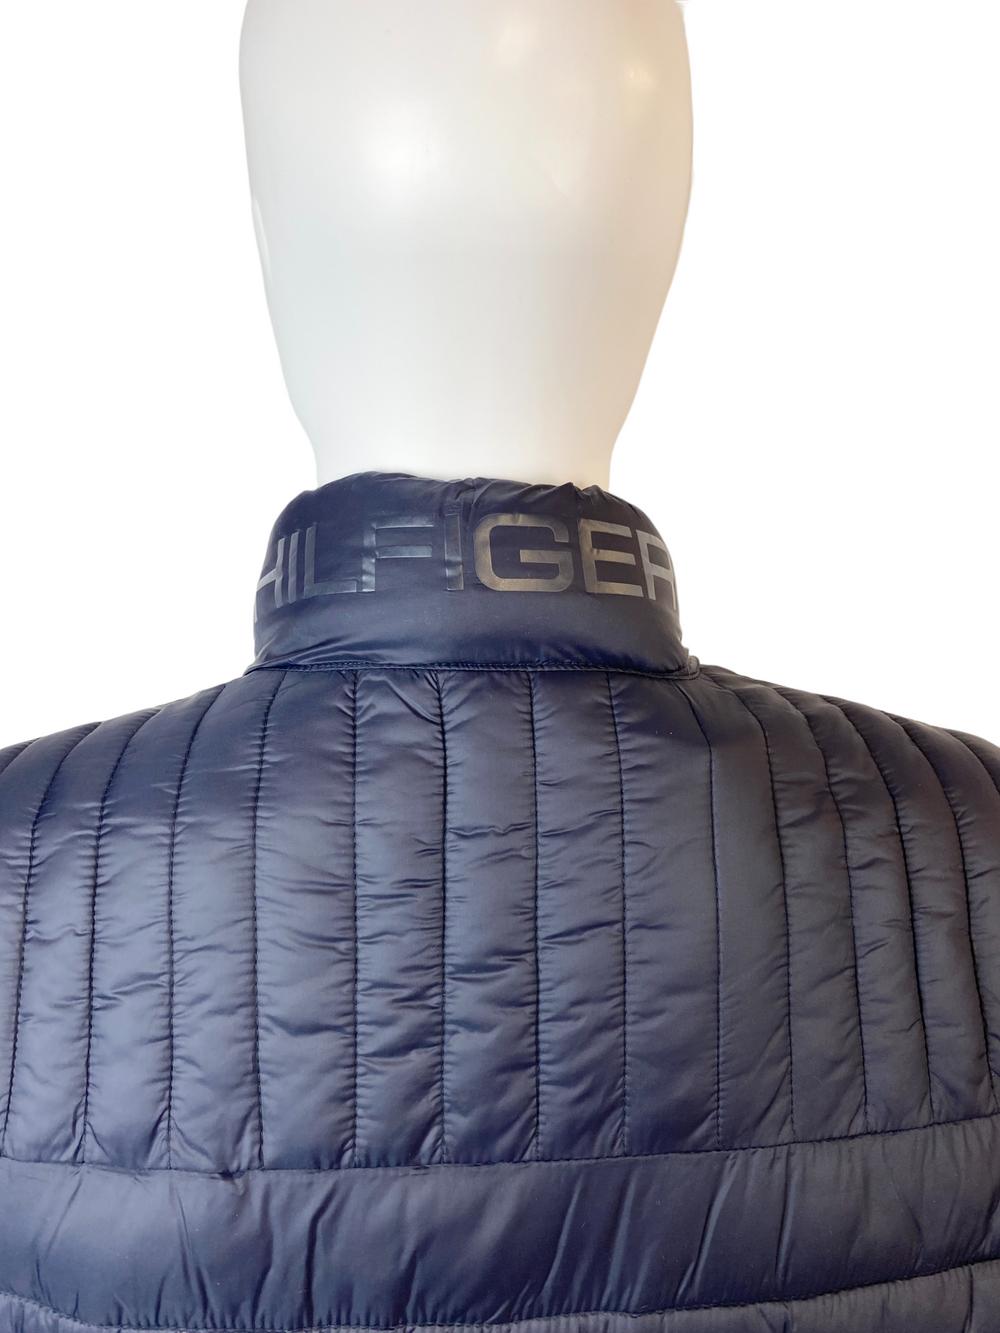 Tommy Hilfiger Mens Quilted Nylon Packable Winter Jacket - 150AN796